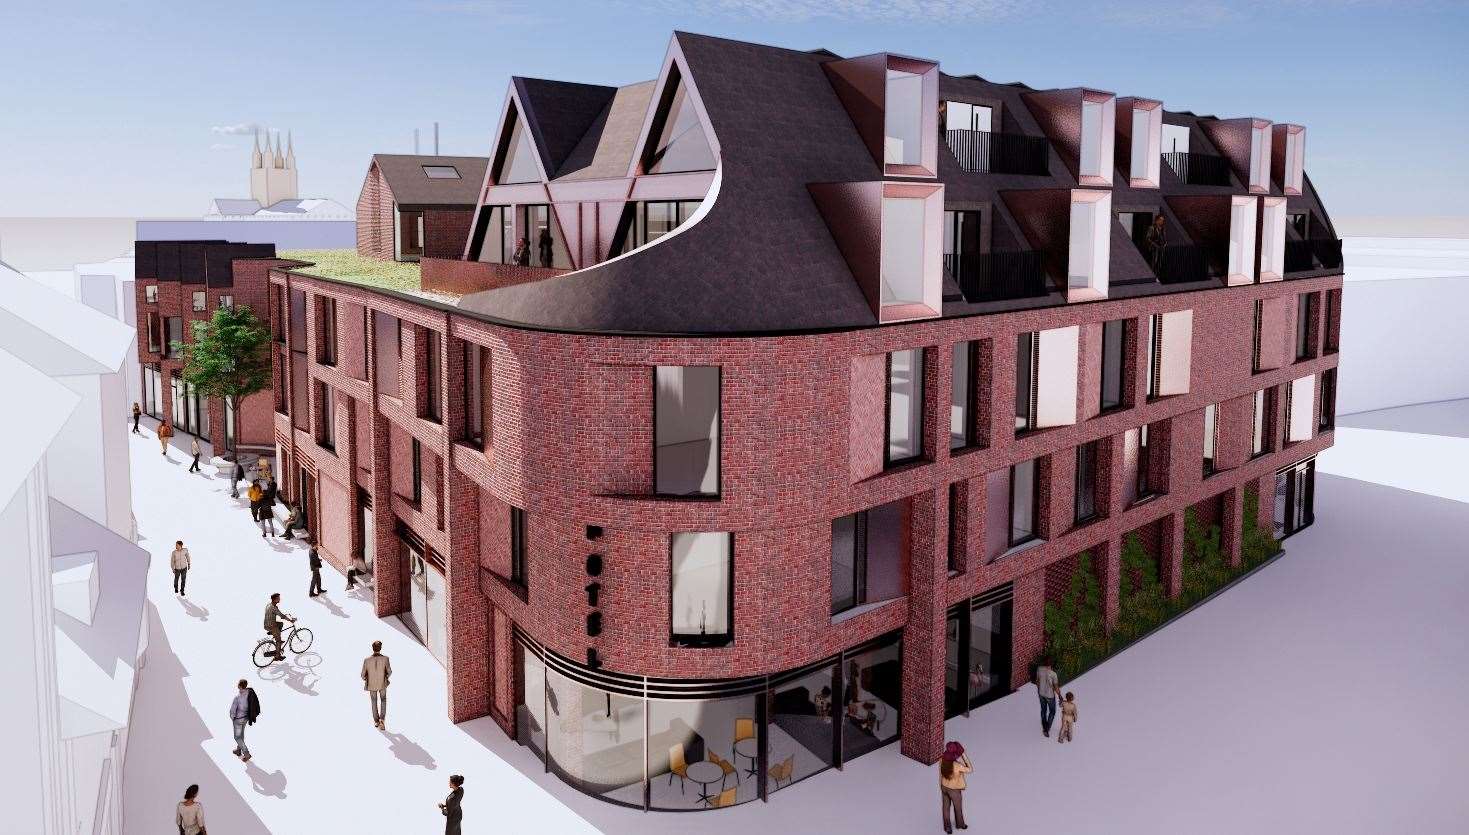 A view of the proposed hotel in New Rents. Picture: Hollaway